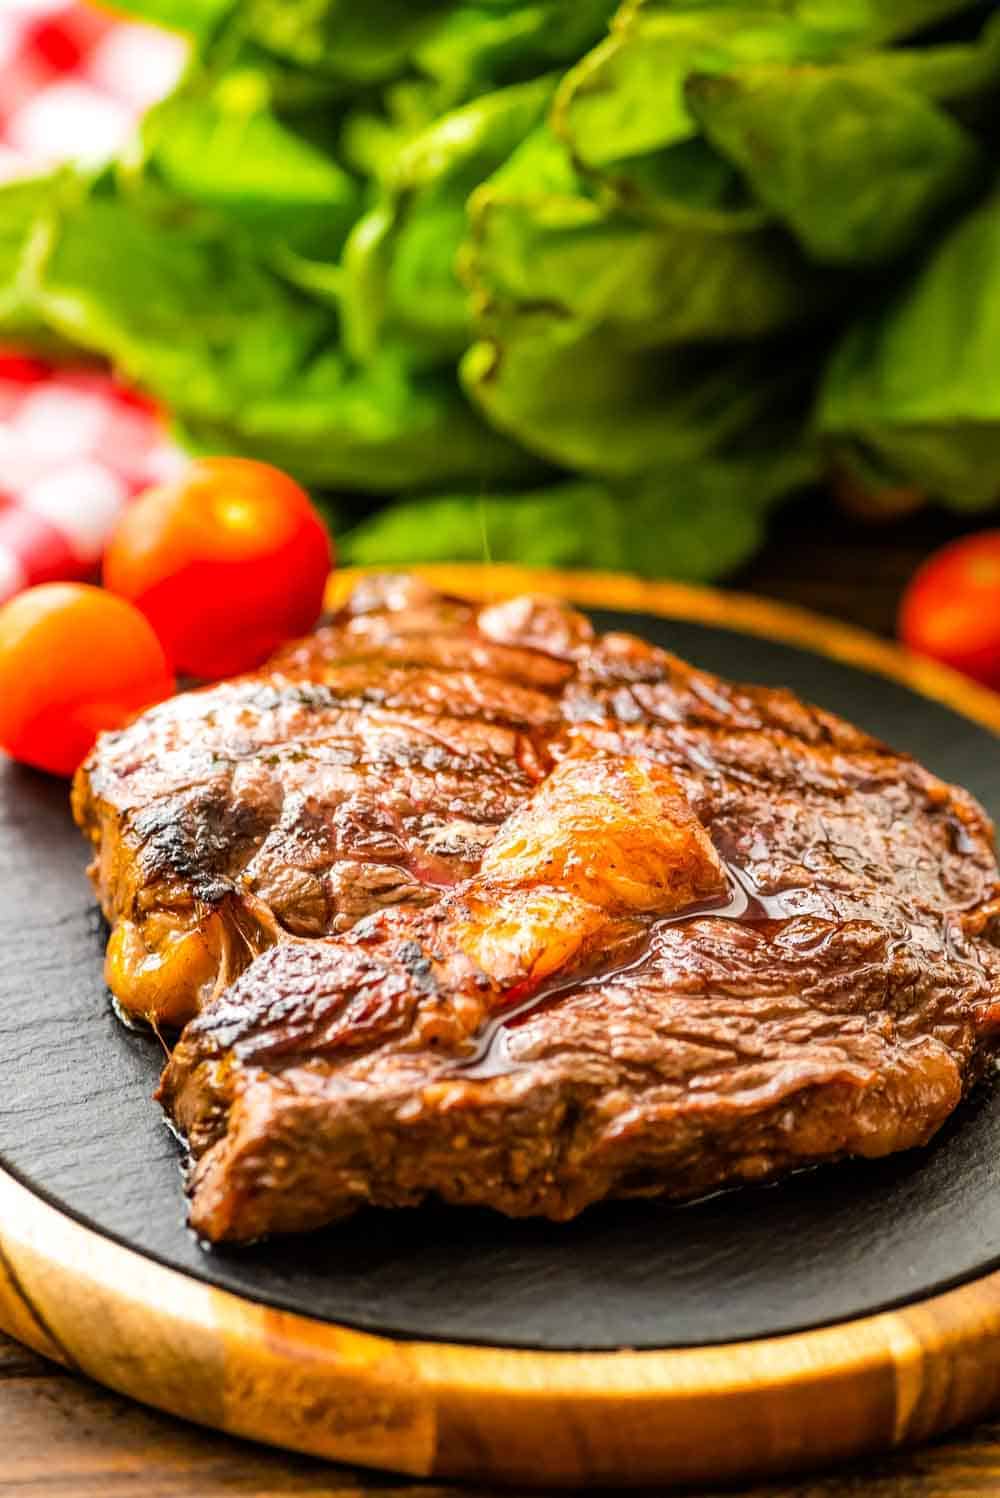 Red wine marinated steak on cutting board with cherry tomatoes and lettuce in background